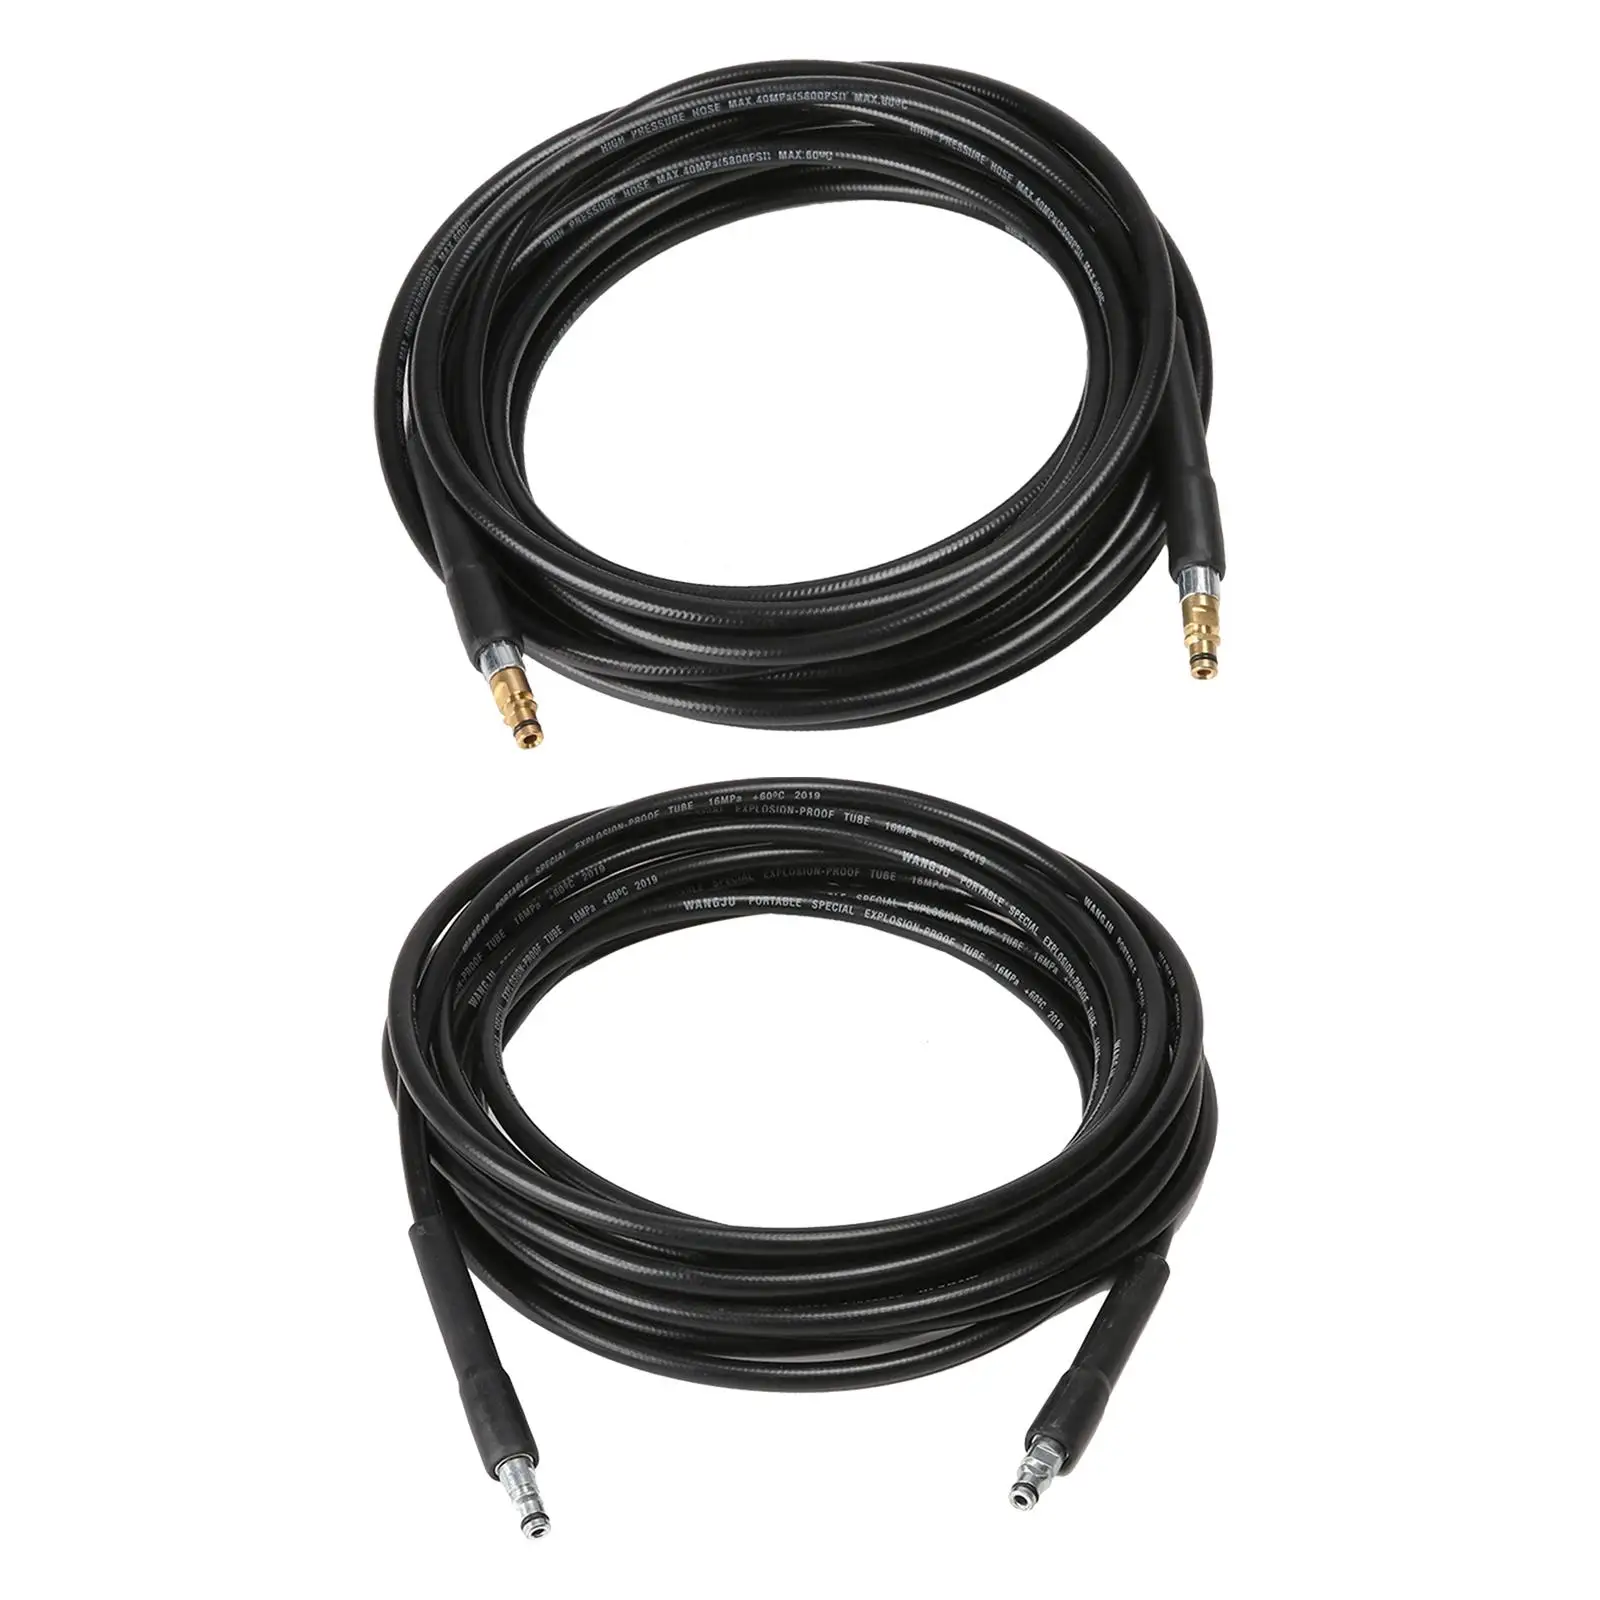 Electric wash Hose 49ft Flexible Universal Rubber Accessories Replace Quick Connect Pressure Washing Extension Hose